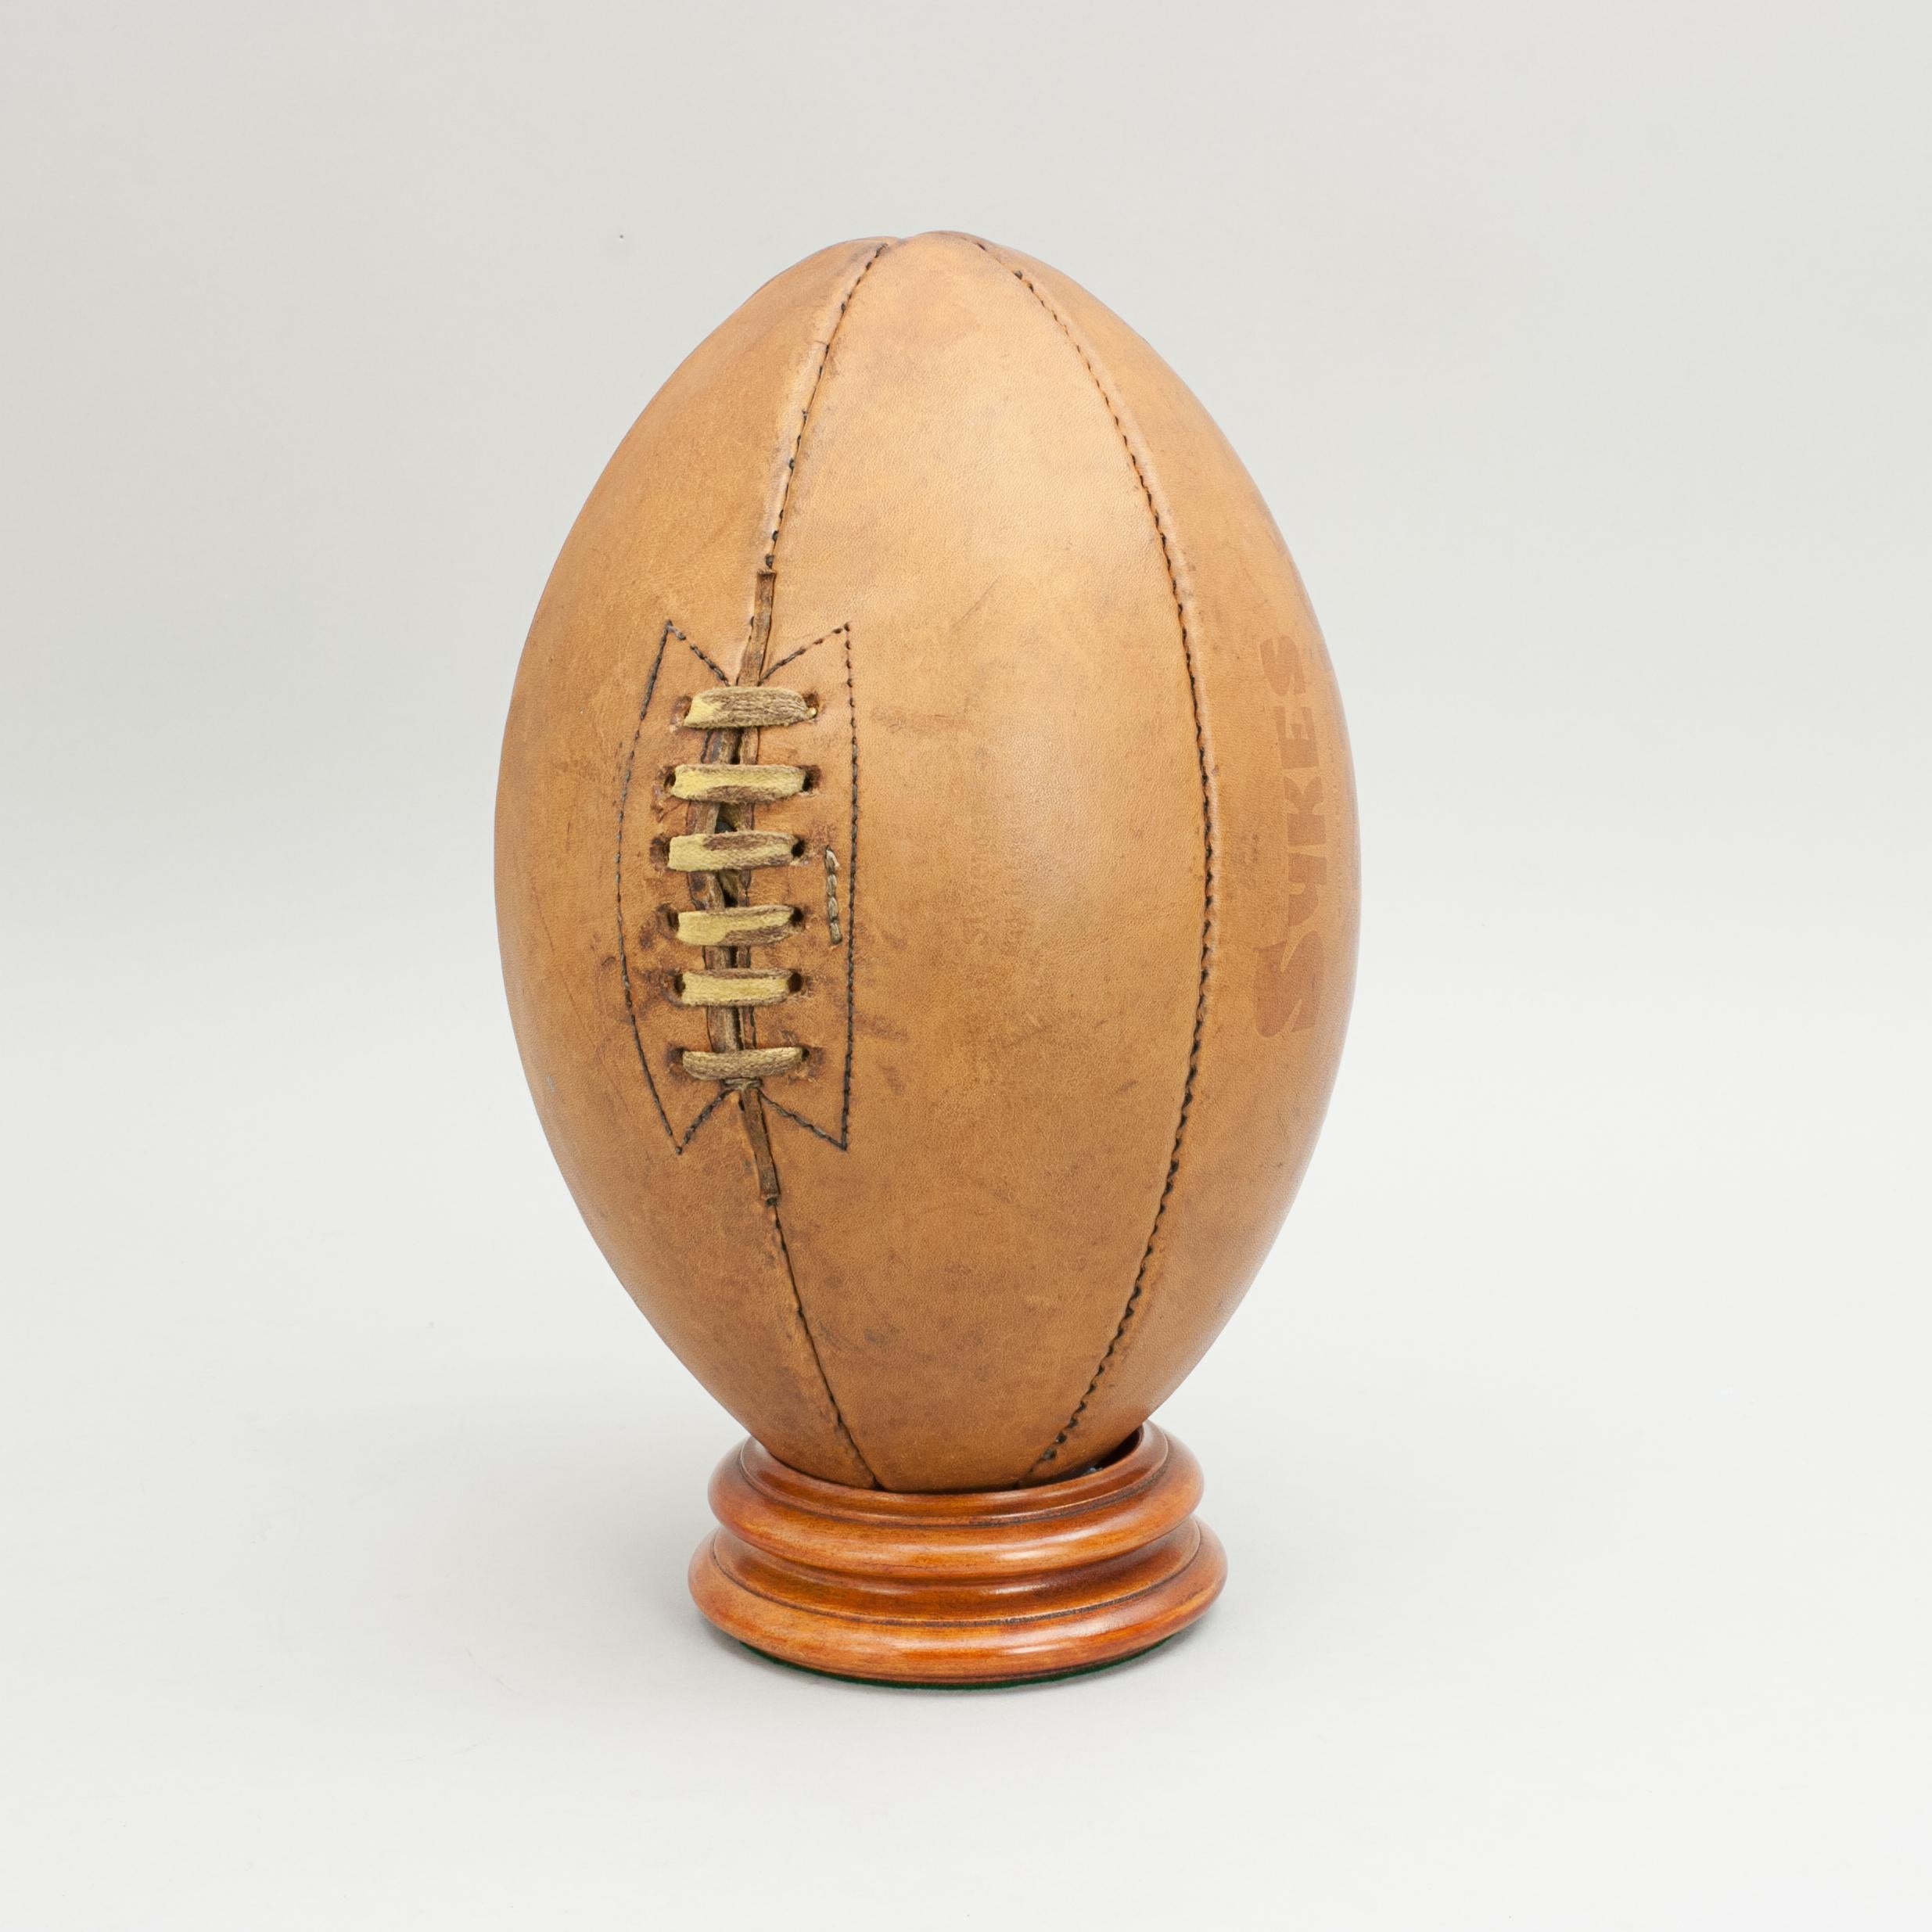 English Vintage Sykes Rugby Ball, Perfection in Leather